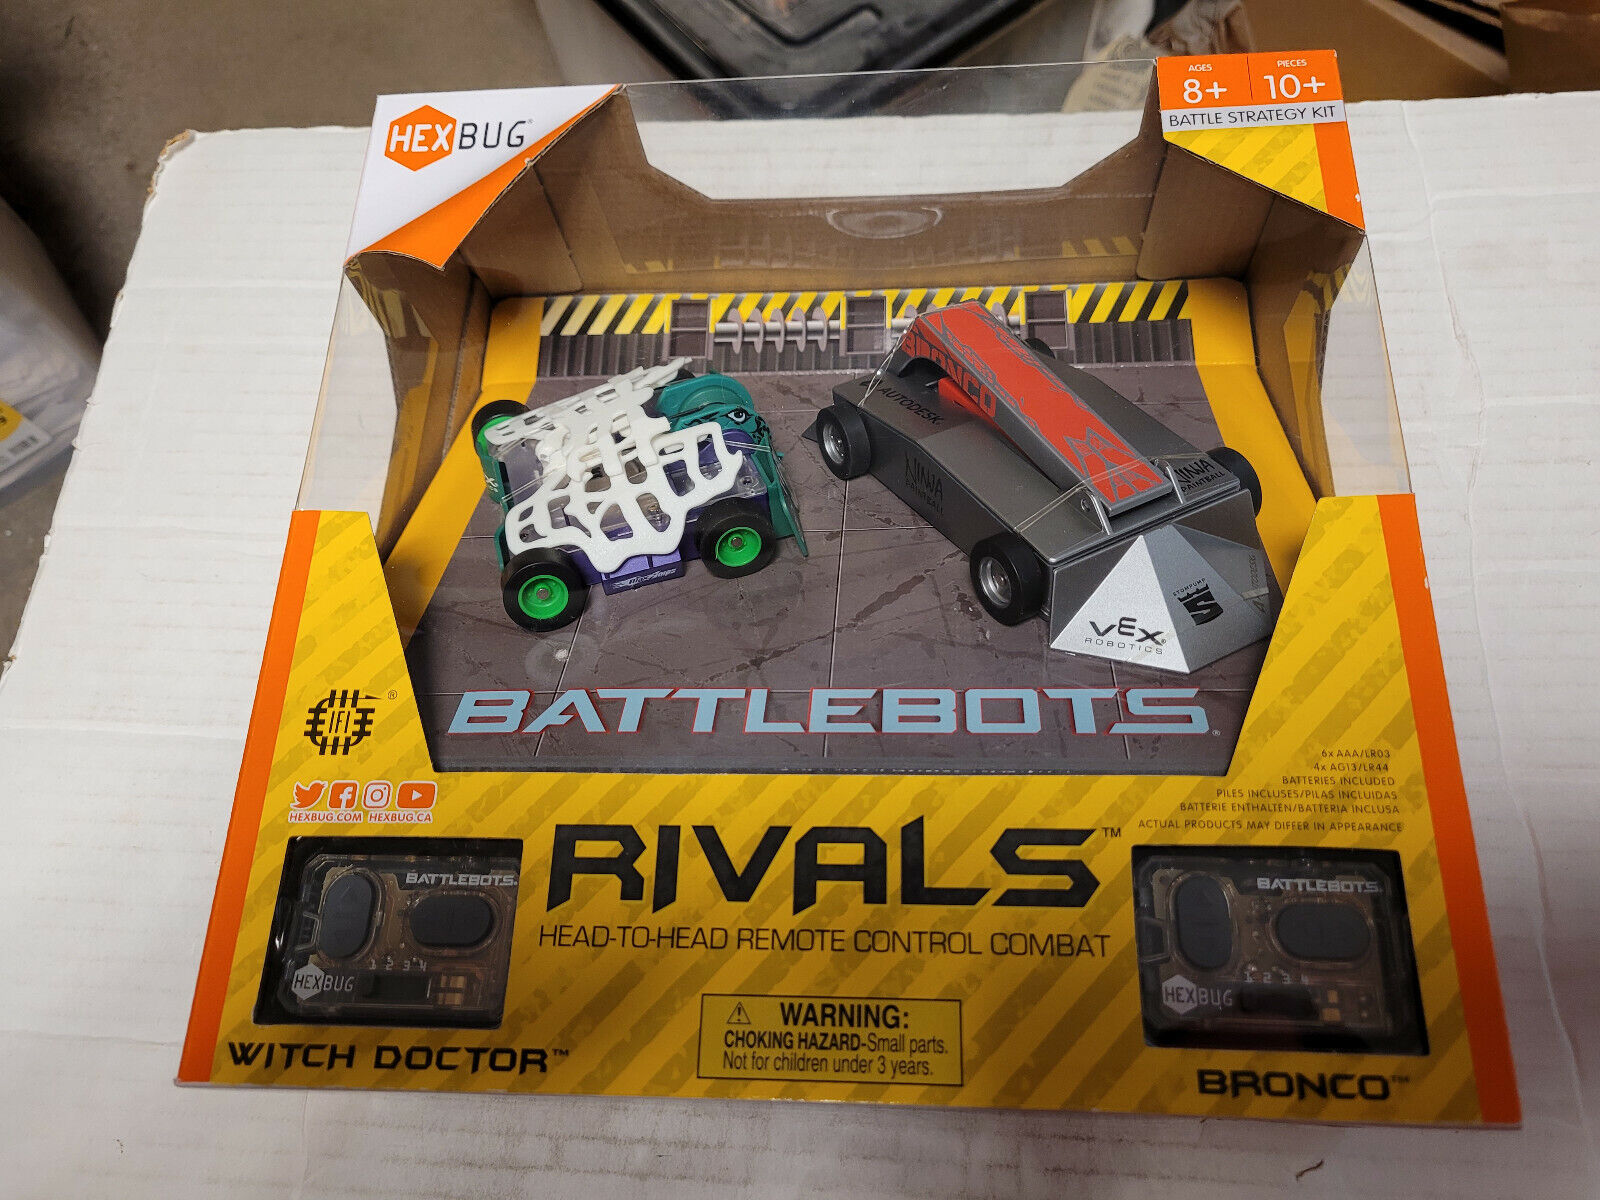 Hexbug Battlebots Rivals Witch Doctor Vs Bronco Remote Control New